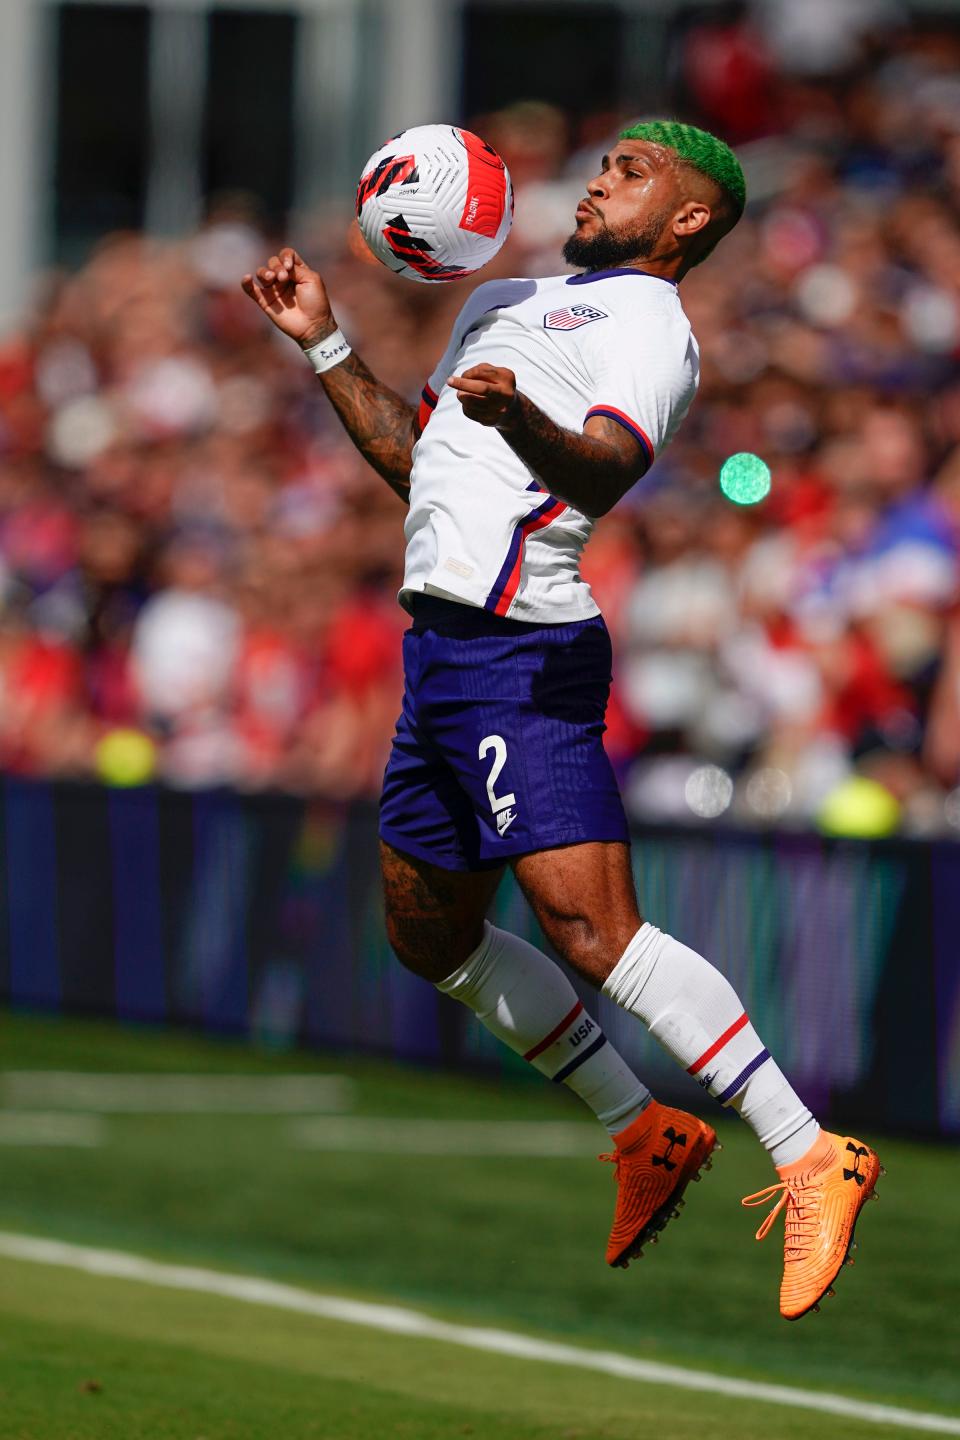 DeAndre Yedlin (2) of the United States directs a pass away from the Uruguay defense during the first half of the friendly match at Children's Mercy Park on June 5, 2022 in Kansas City, Kansas.